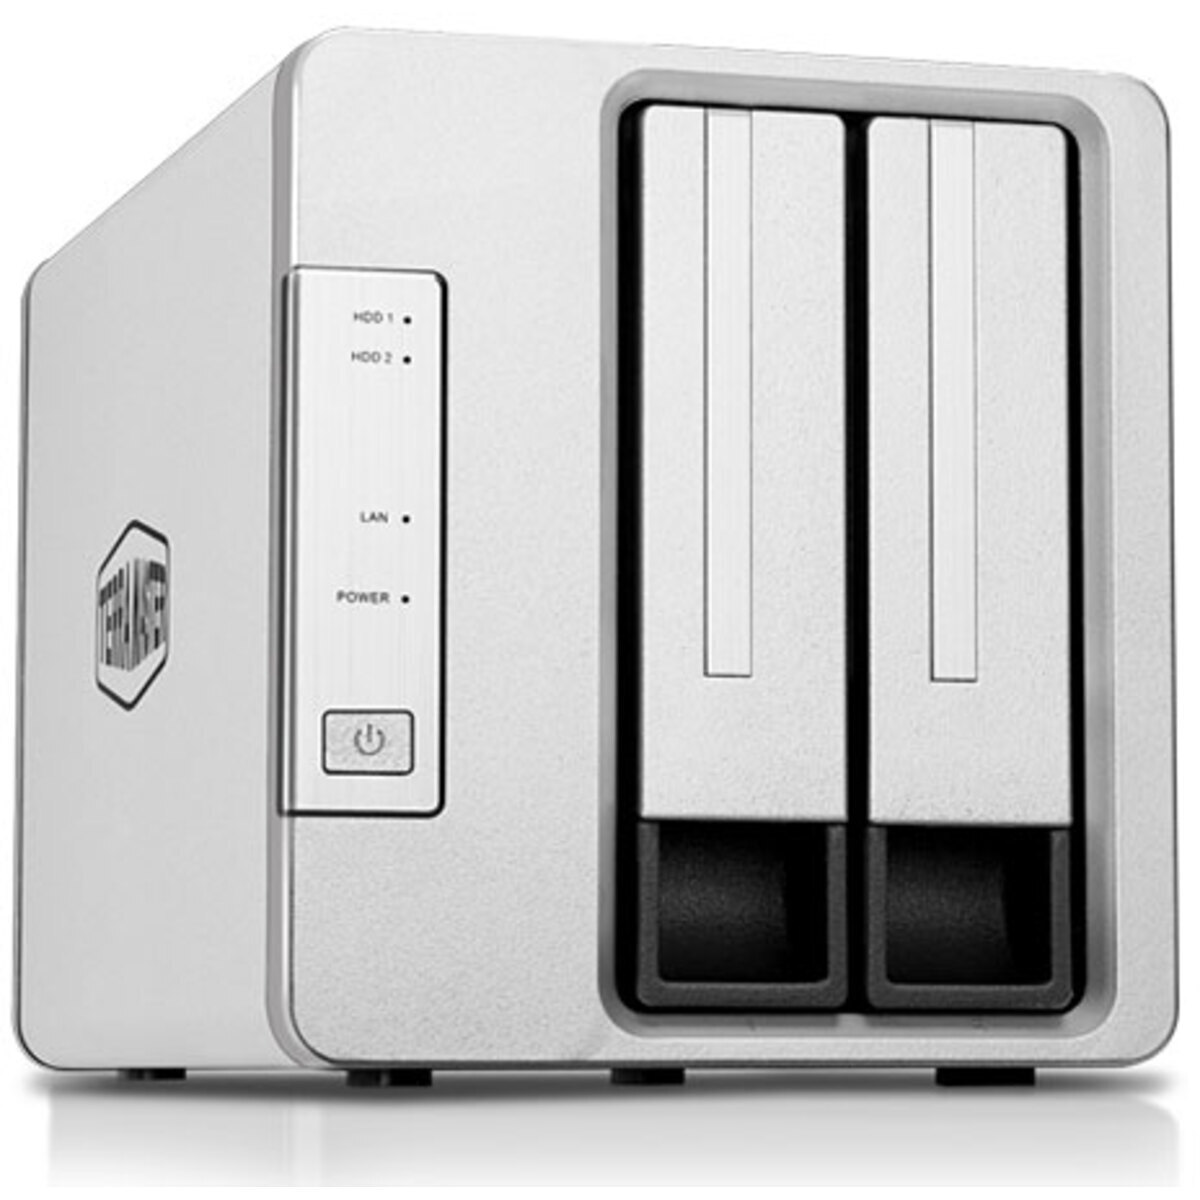 TerraMaster F2-223 2tb 2-Bay Desktop Personal / Basic Home / Small Office NAS - Network Attached Storage Device 2x1tb Sandisk Ultra 3D SDSSDH3-1T00 2.5 560/520MB/s SATA 6Gb/s SSD CONSUMER Class Drives Installed - Burn-In Tested - FREE RAM UPGRADE F2-223